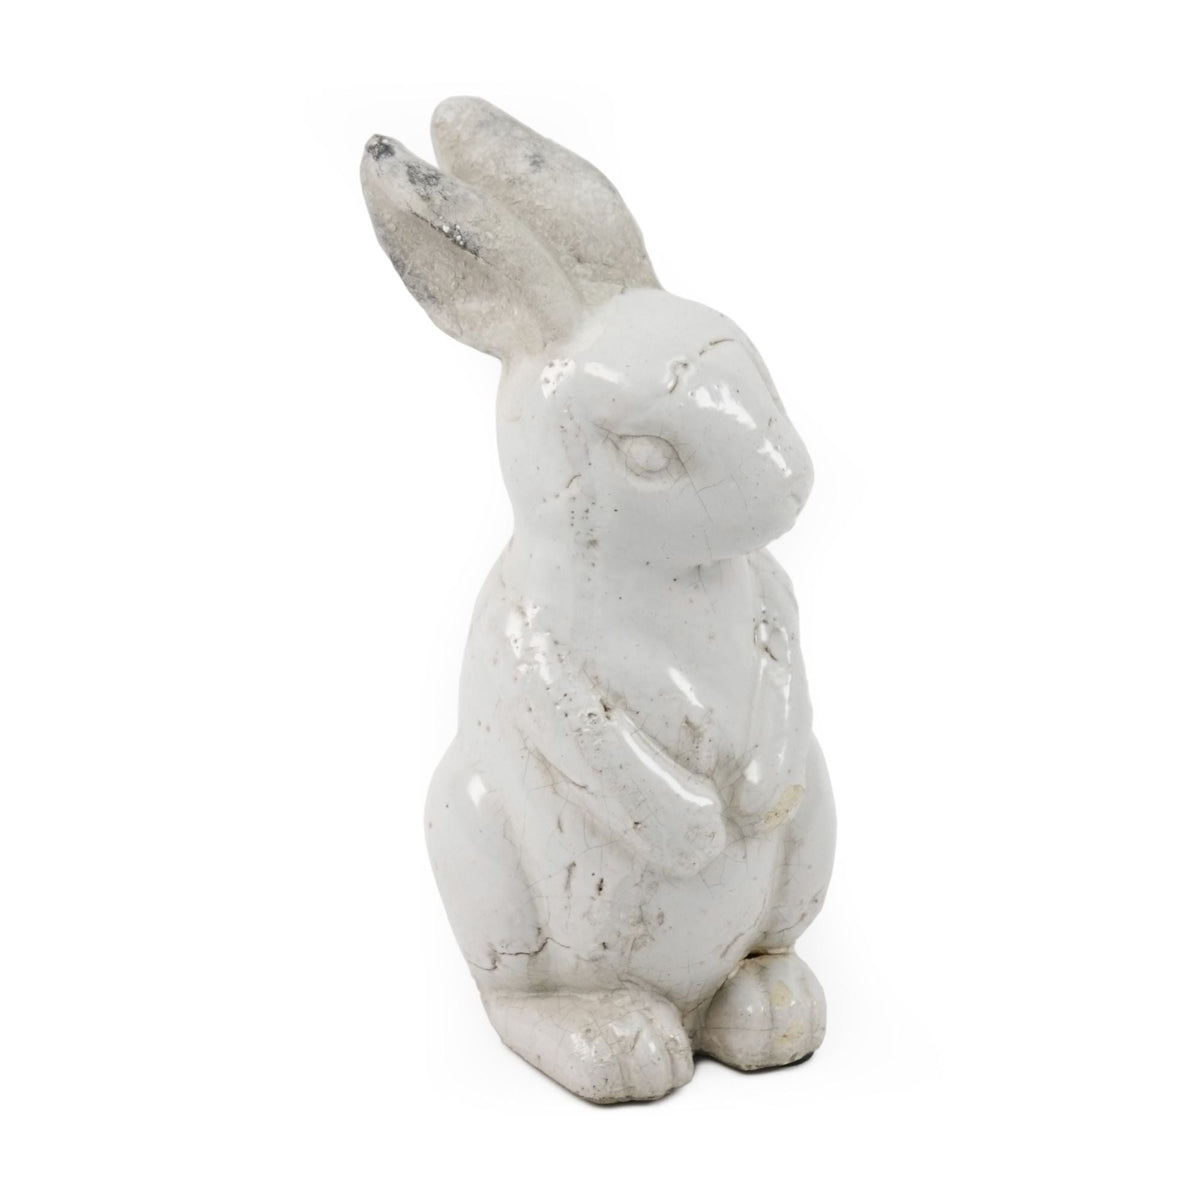 Distressed White Rabbit Large (4759L) by Zentique